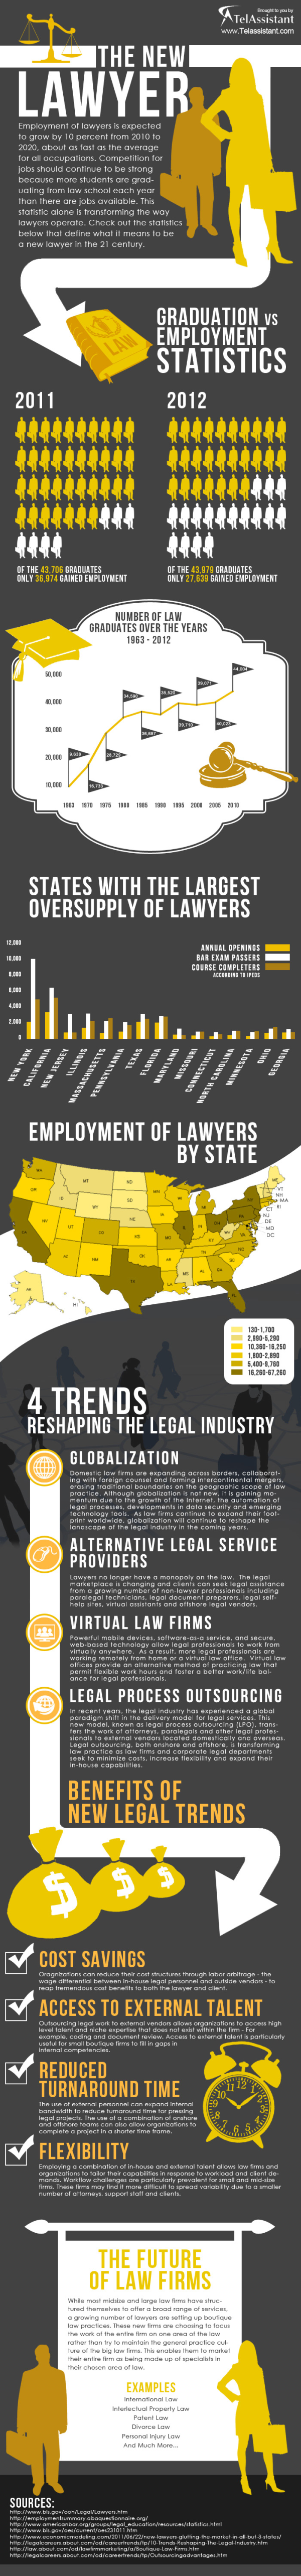 lawyer employment statistics infographic consultants california